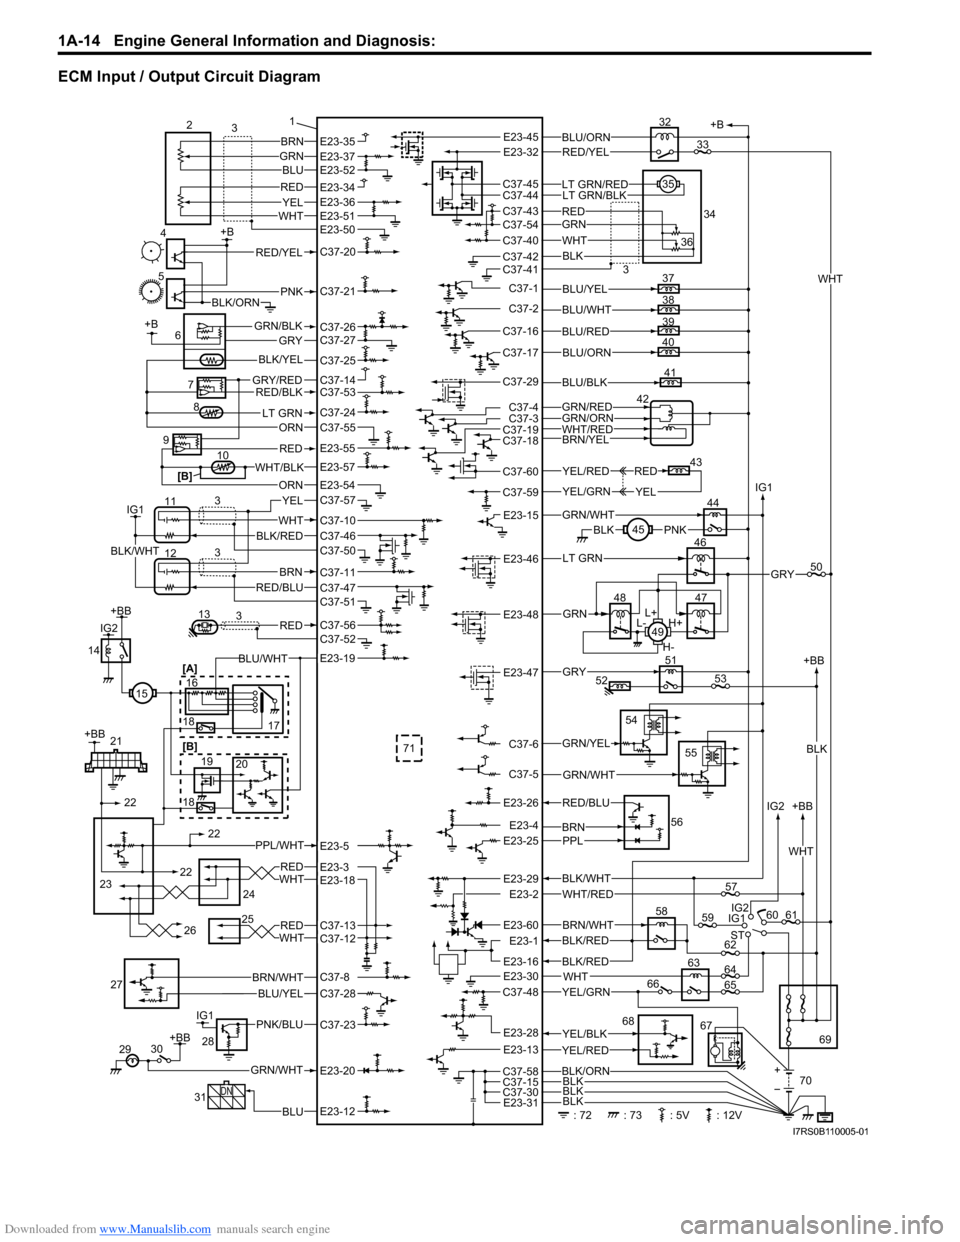 SUZUKI SWIFT 2008 2.G Service Workshop Manual Downloaded from www.Manualslib.com manuals search engine 1A-14 Engine General Information and Diagnosis: 
ECM Input / Output Circuit Diagram
+B
58
IG1 +BB
ST IG2 IG2
60 61
69
BLK/WHT
WHT/RED
BRN/WHTBL